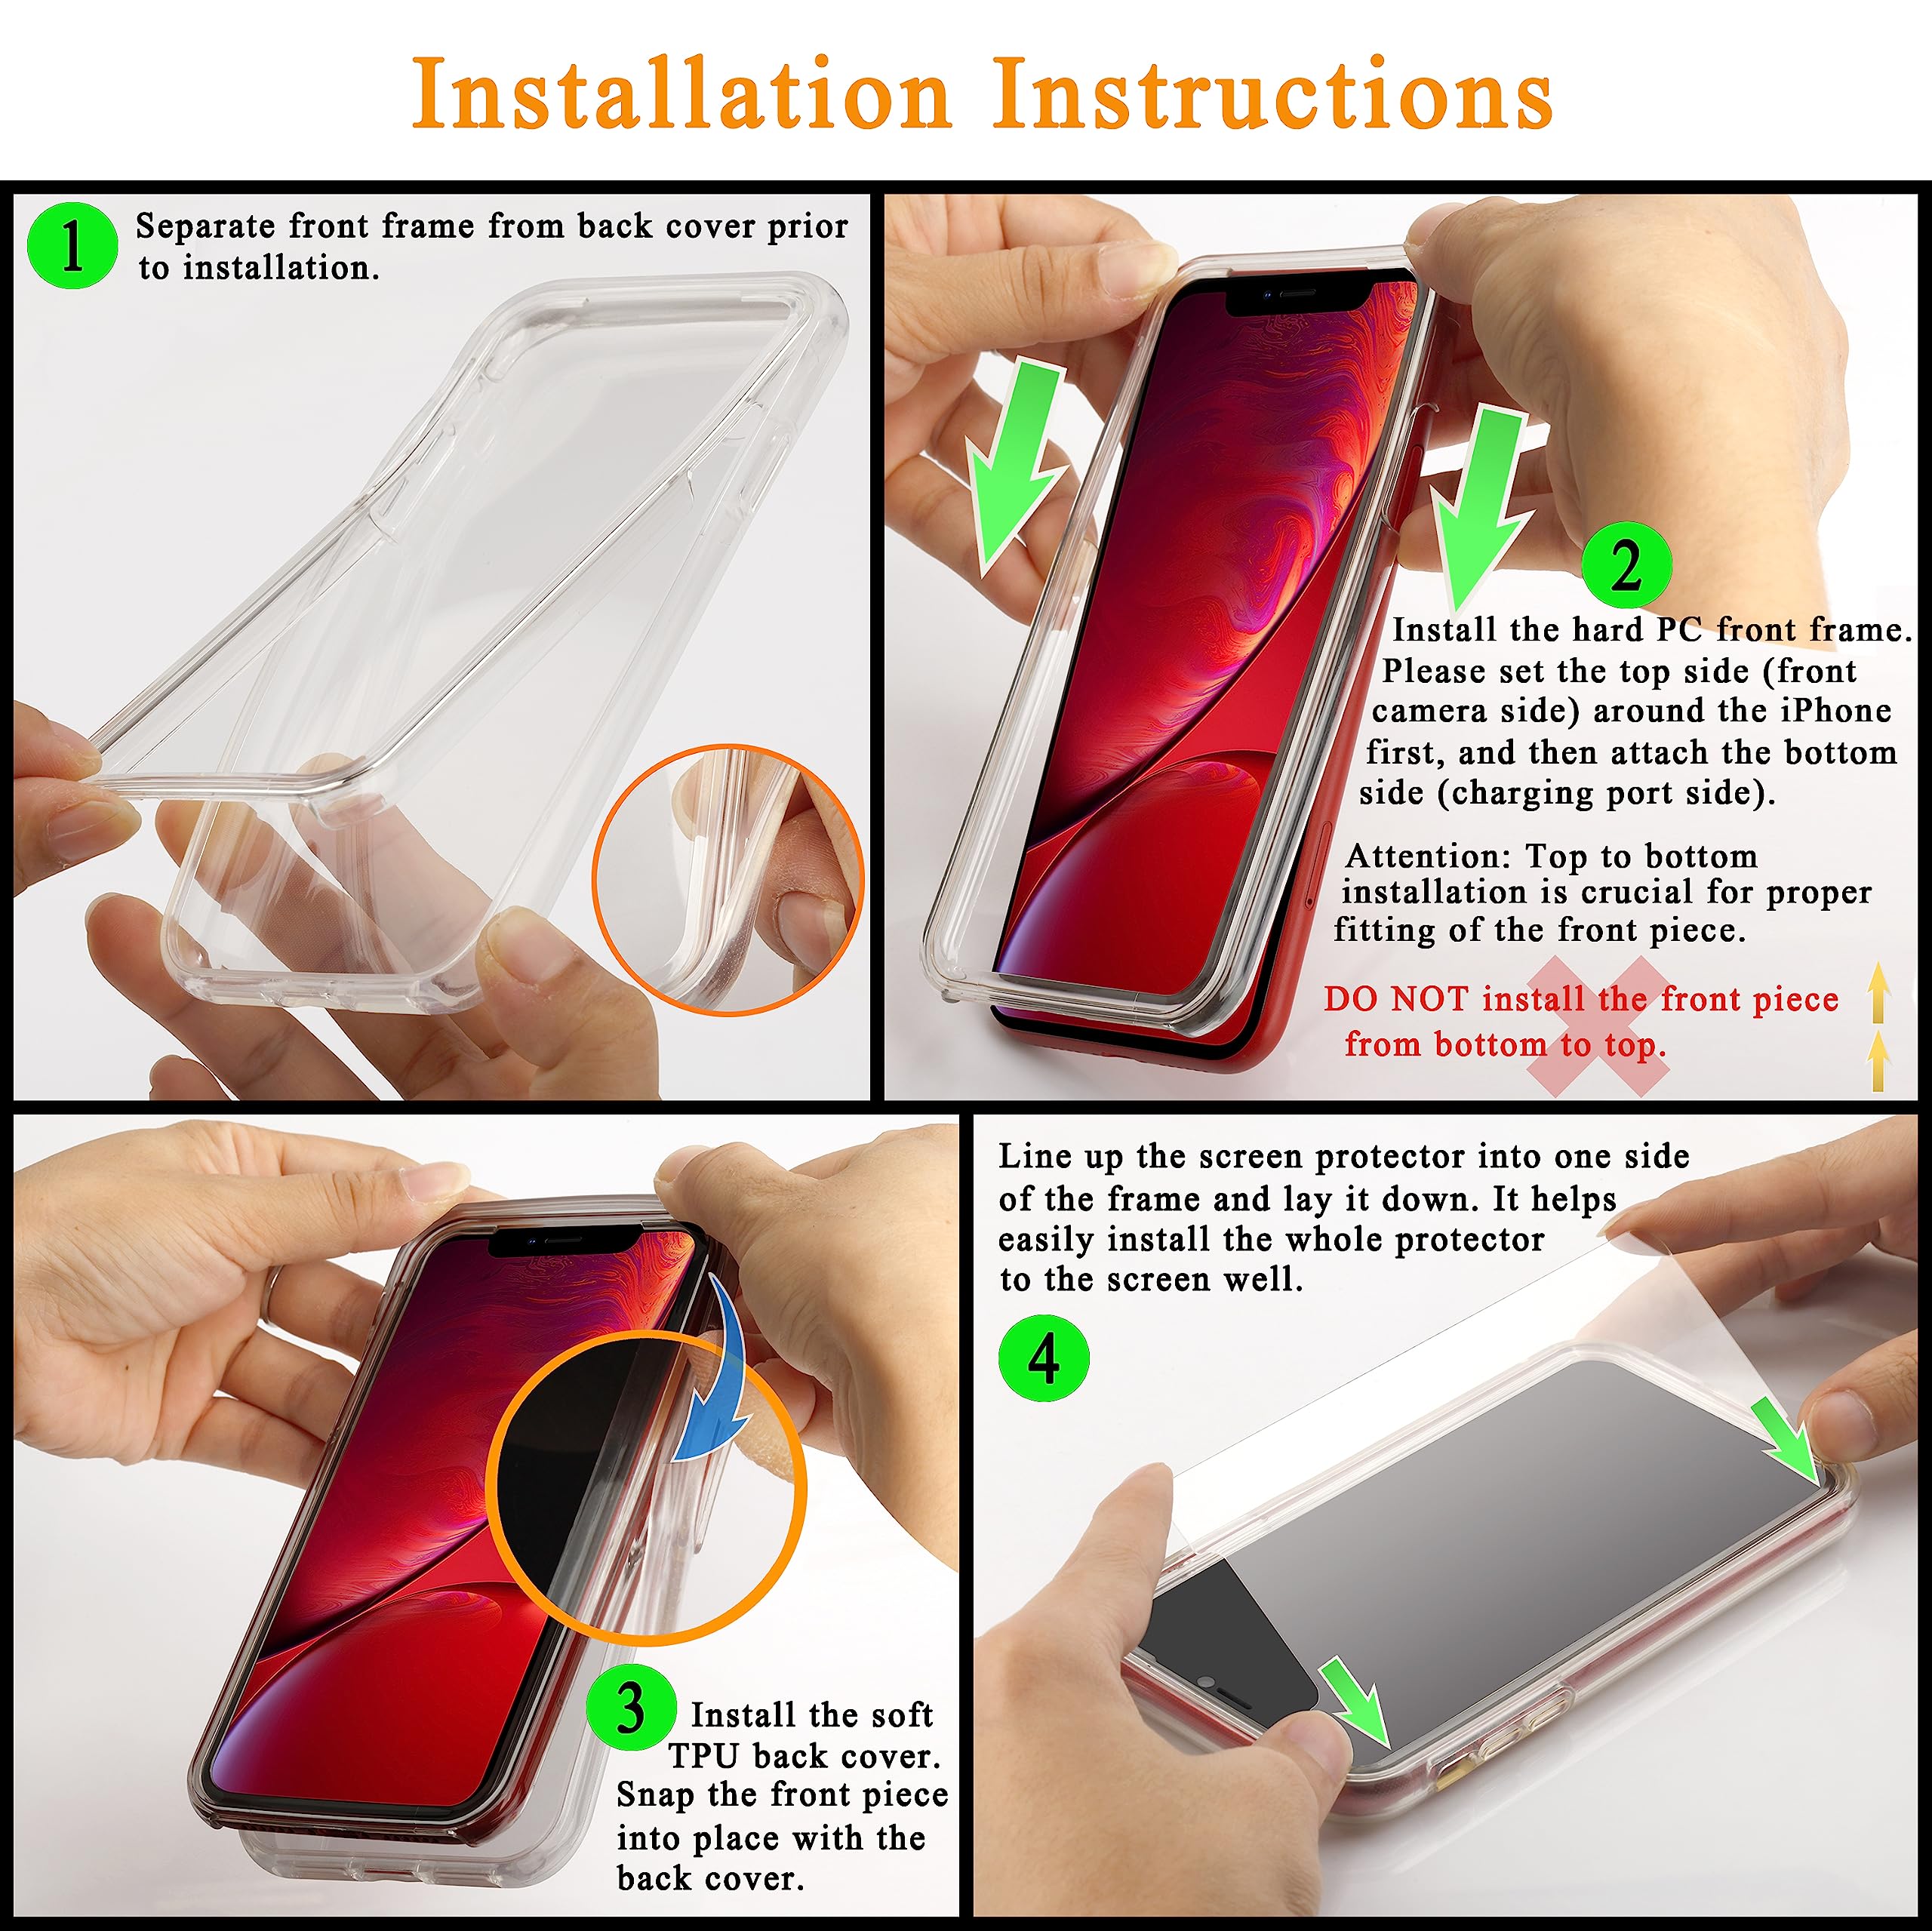 COOLQO Compatible for iPhone SE 2022/2020 Case 4.7 Inch, with [2 x Tempered Glass Screen Protector] Clear 360 Full Body Coverage Hard PC+Soft Silicone TPU 3in1 Protective Shockproof Phone Cover